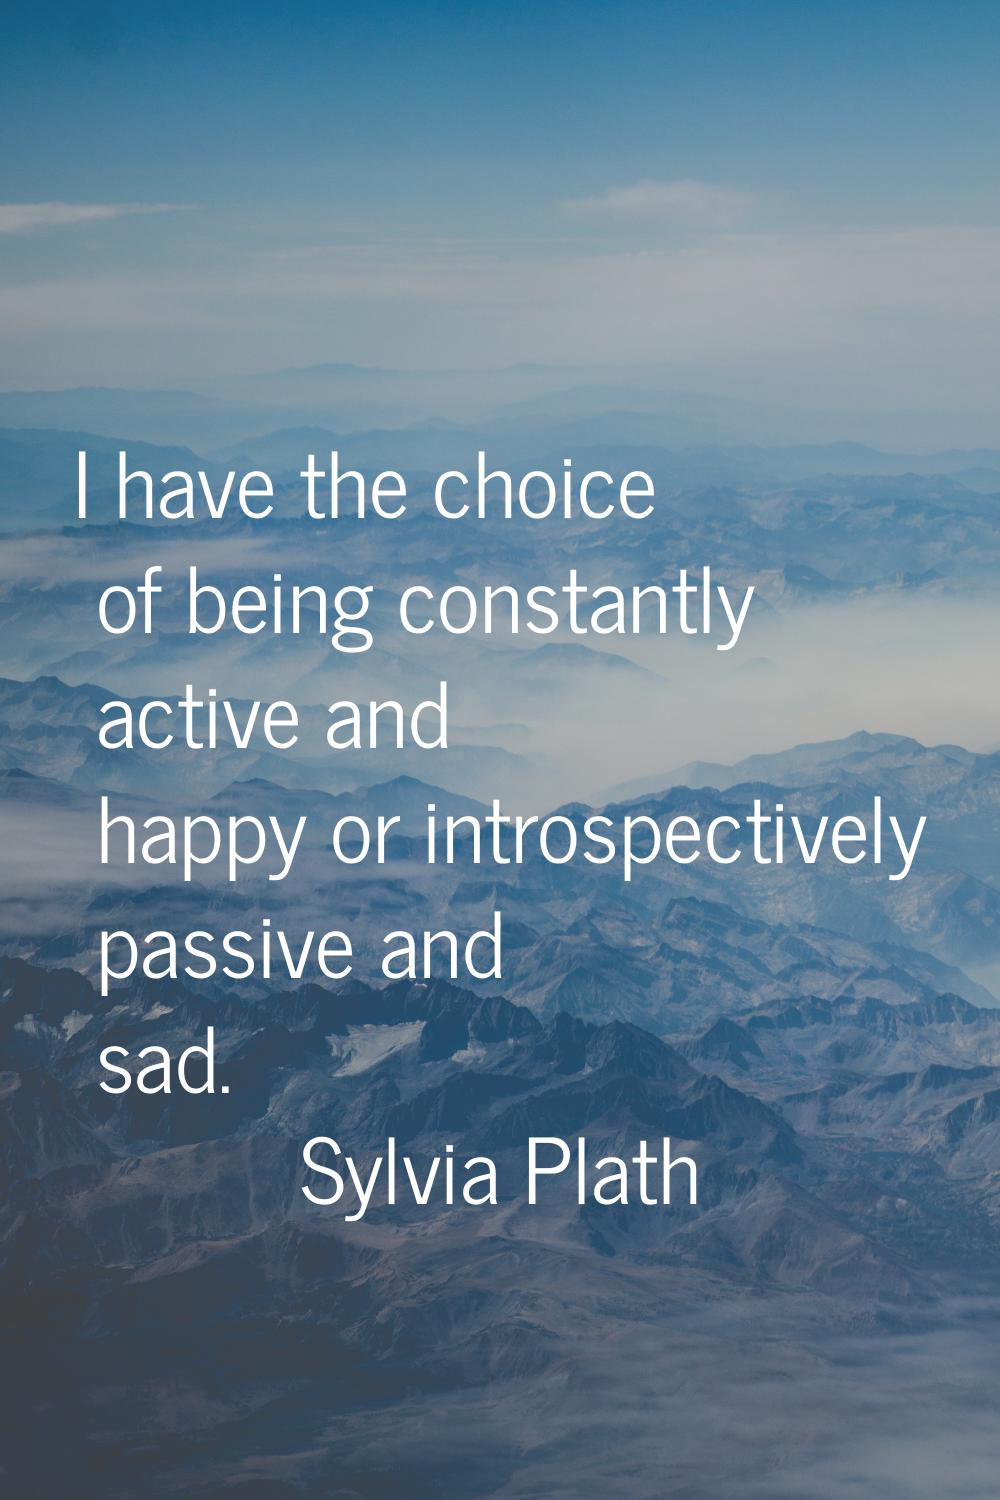 I have the choice of being constantly active and happy or introspectively passive and sad.